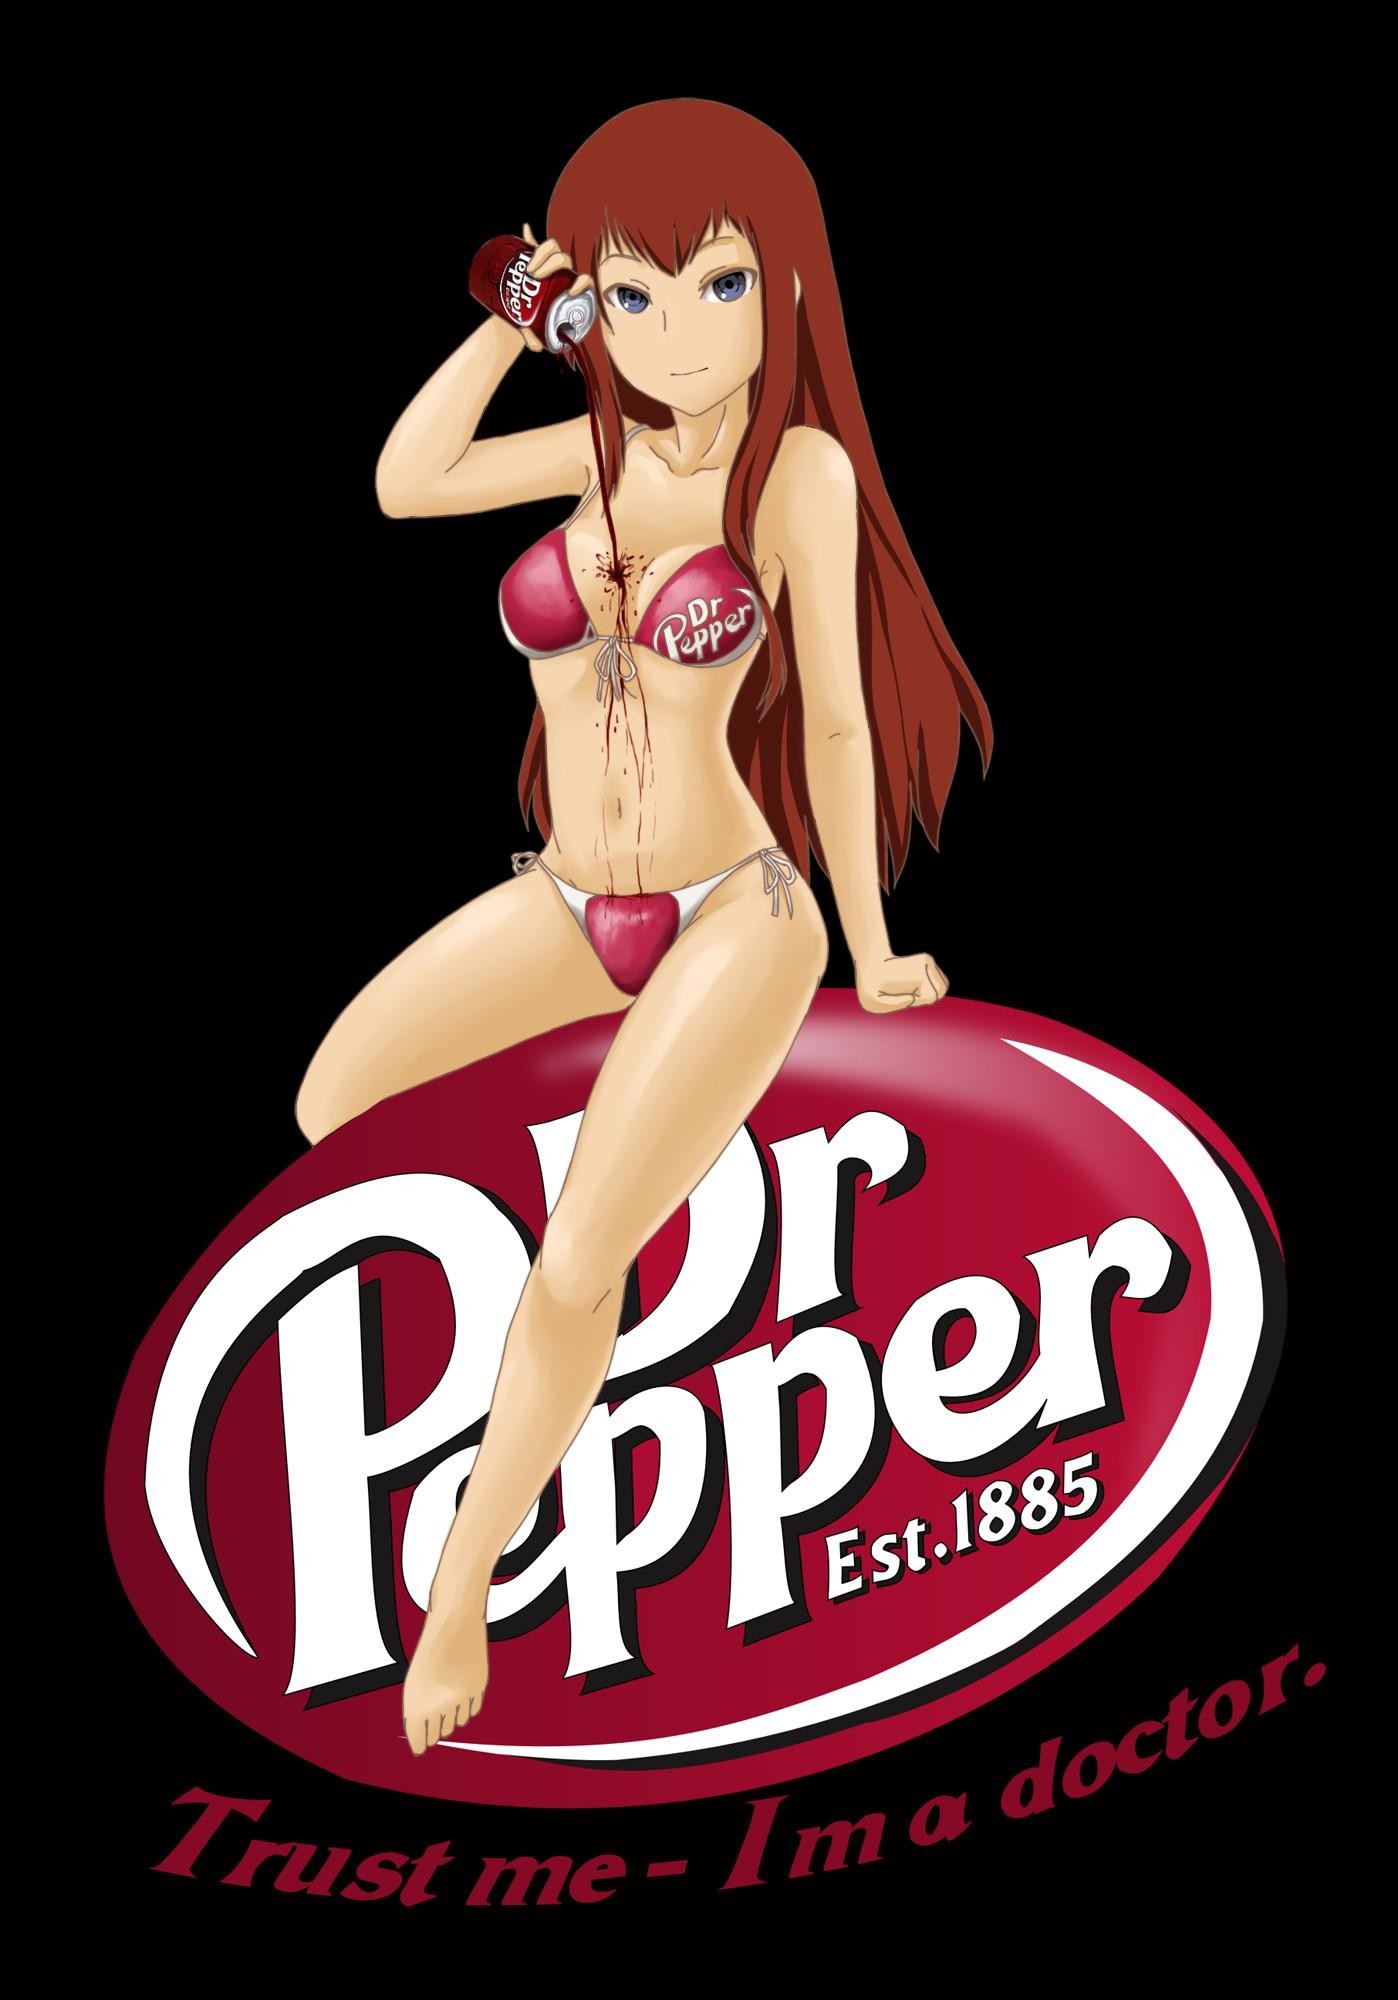 Hd Dr Pepper Wallpapers And Photos Hd Food And Drink Wallpapers 1398x2000